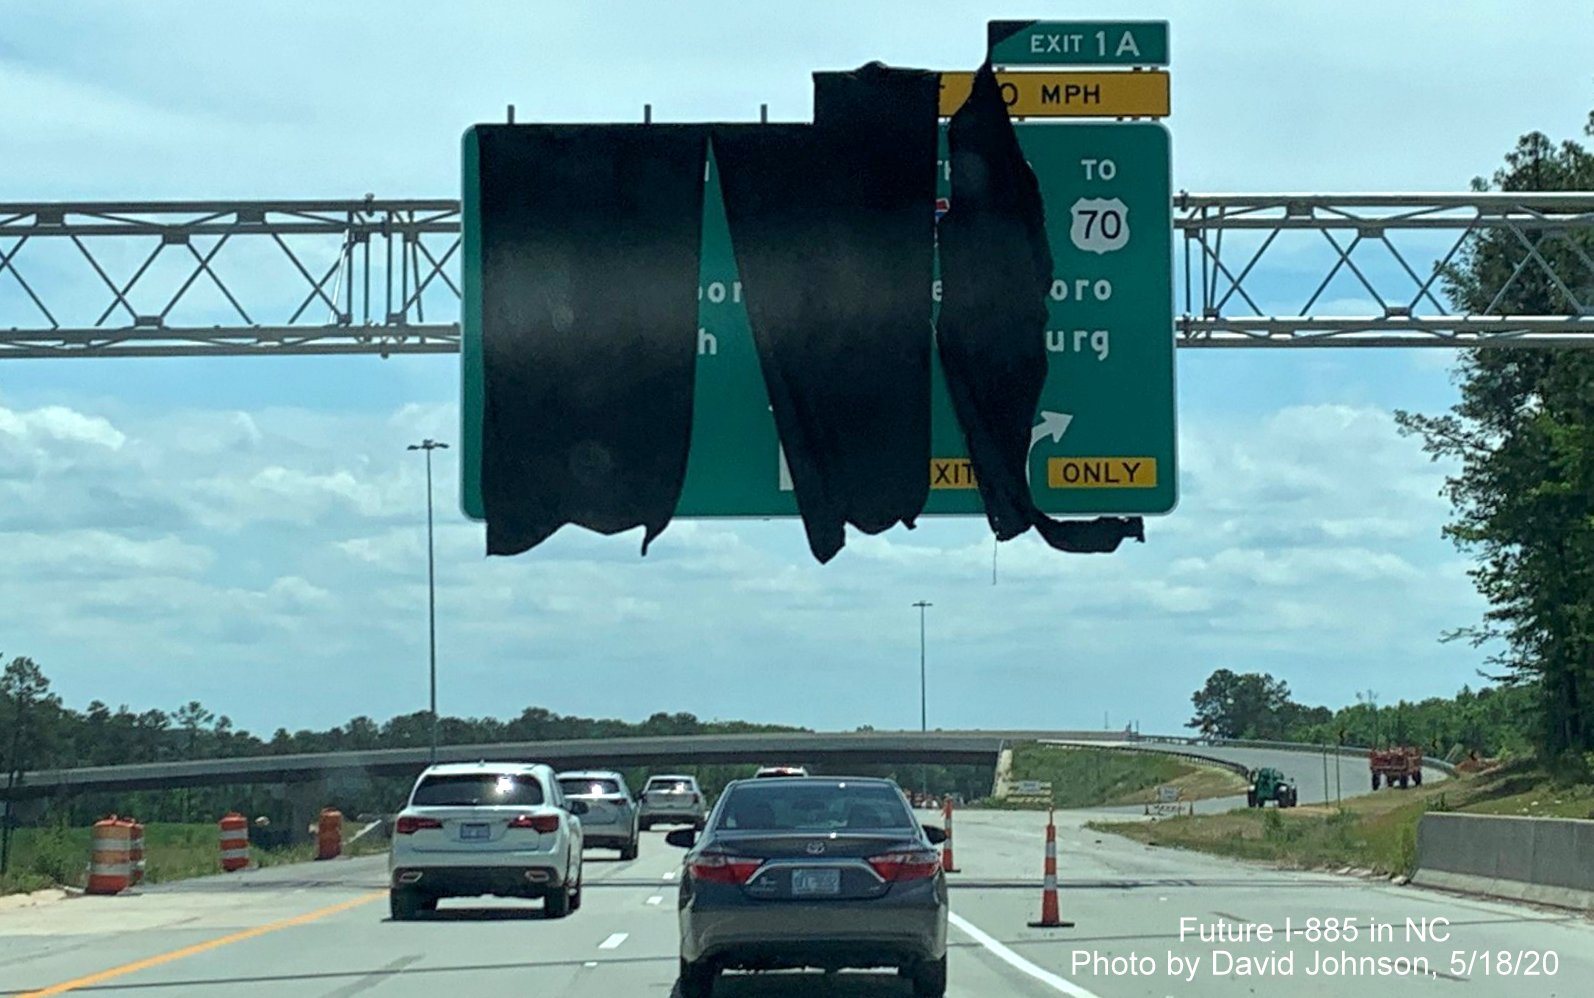 Image of recently placed overhead exit sign at ramp to Future I-885 North/East End Connector with correct exit number on NC 147 South in Durham, by David Johnson in May 2020